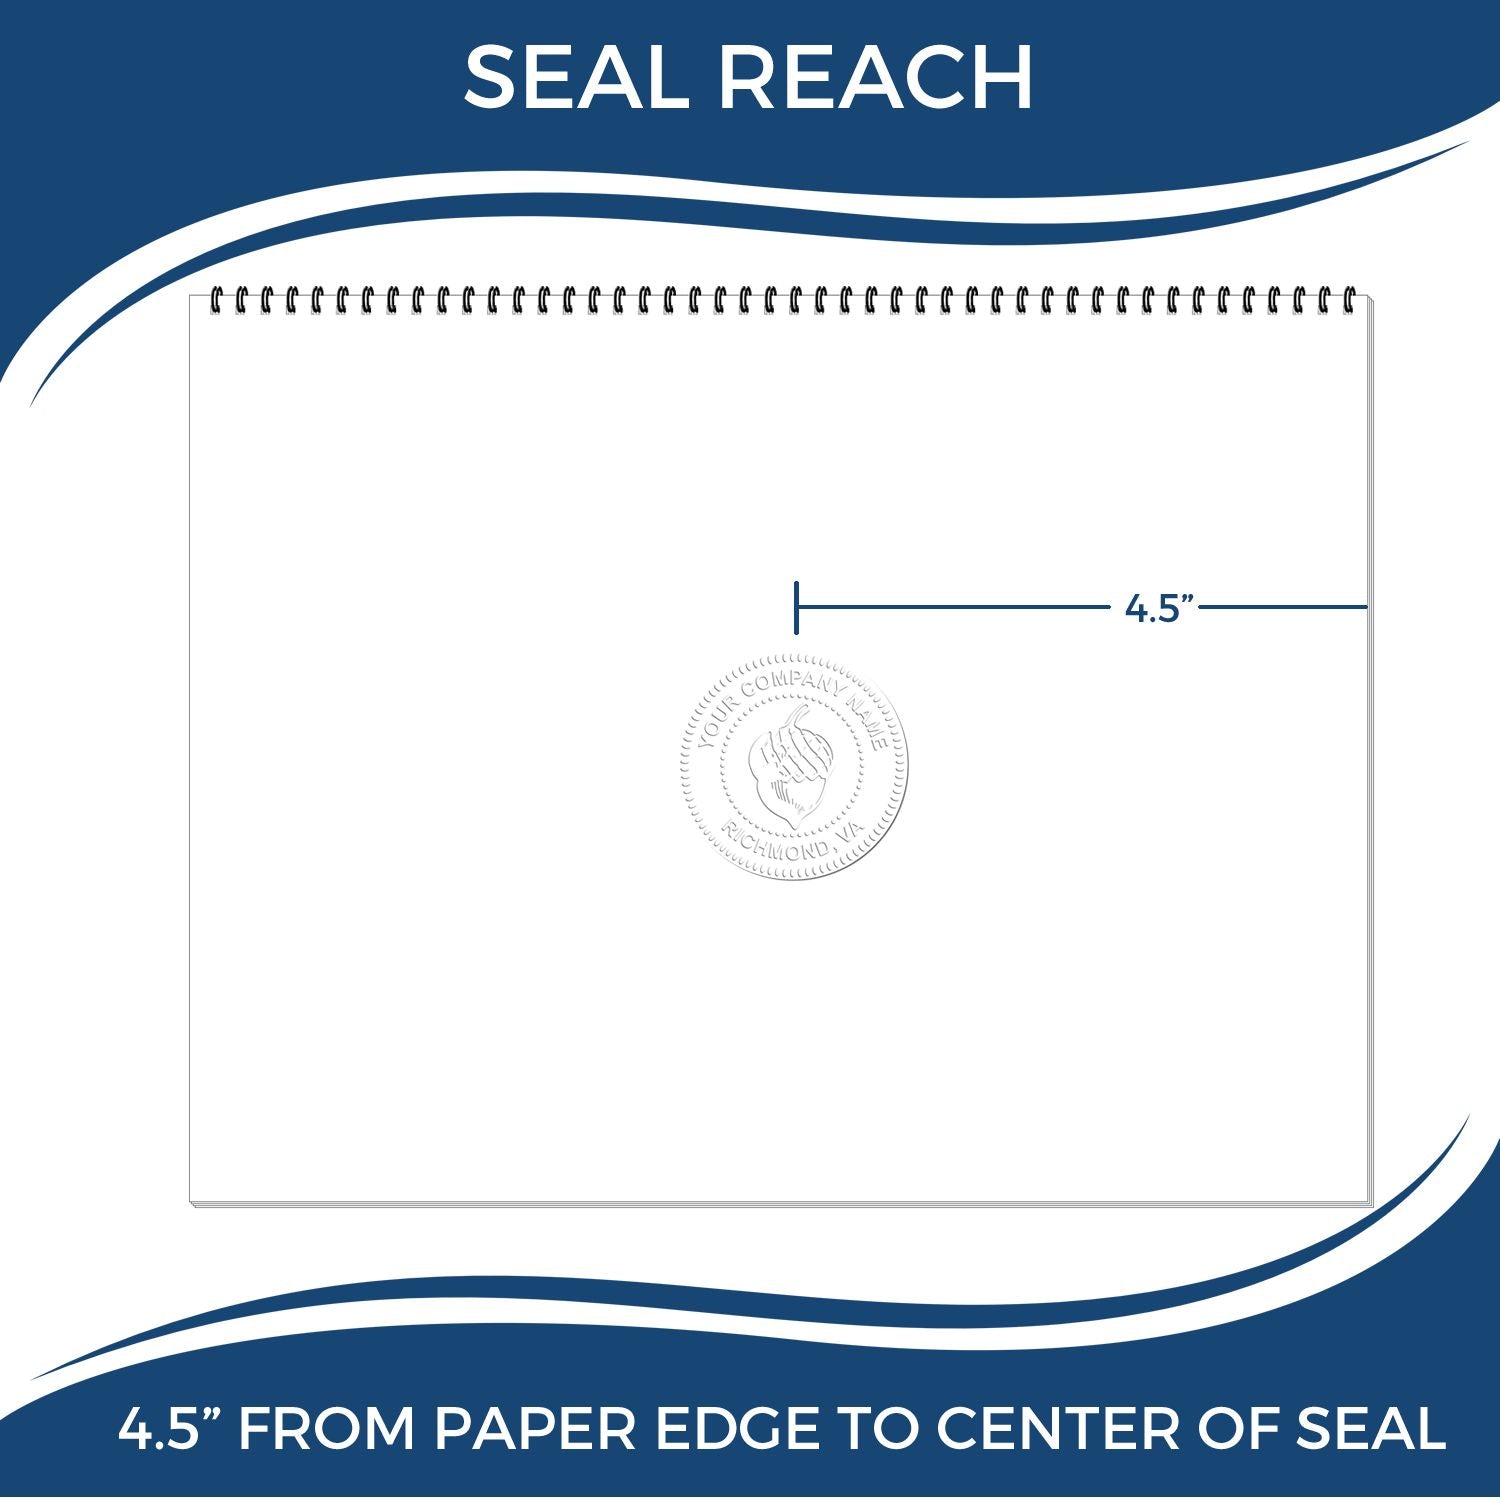 An infographic showing the seal reach which is represented by a ruler and a miniature seal image of the Extended Long Reach Missouri Architect Seal Embosser